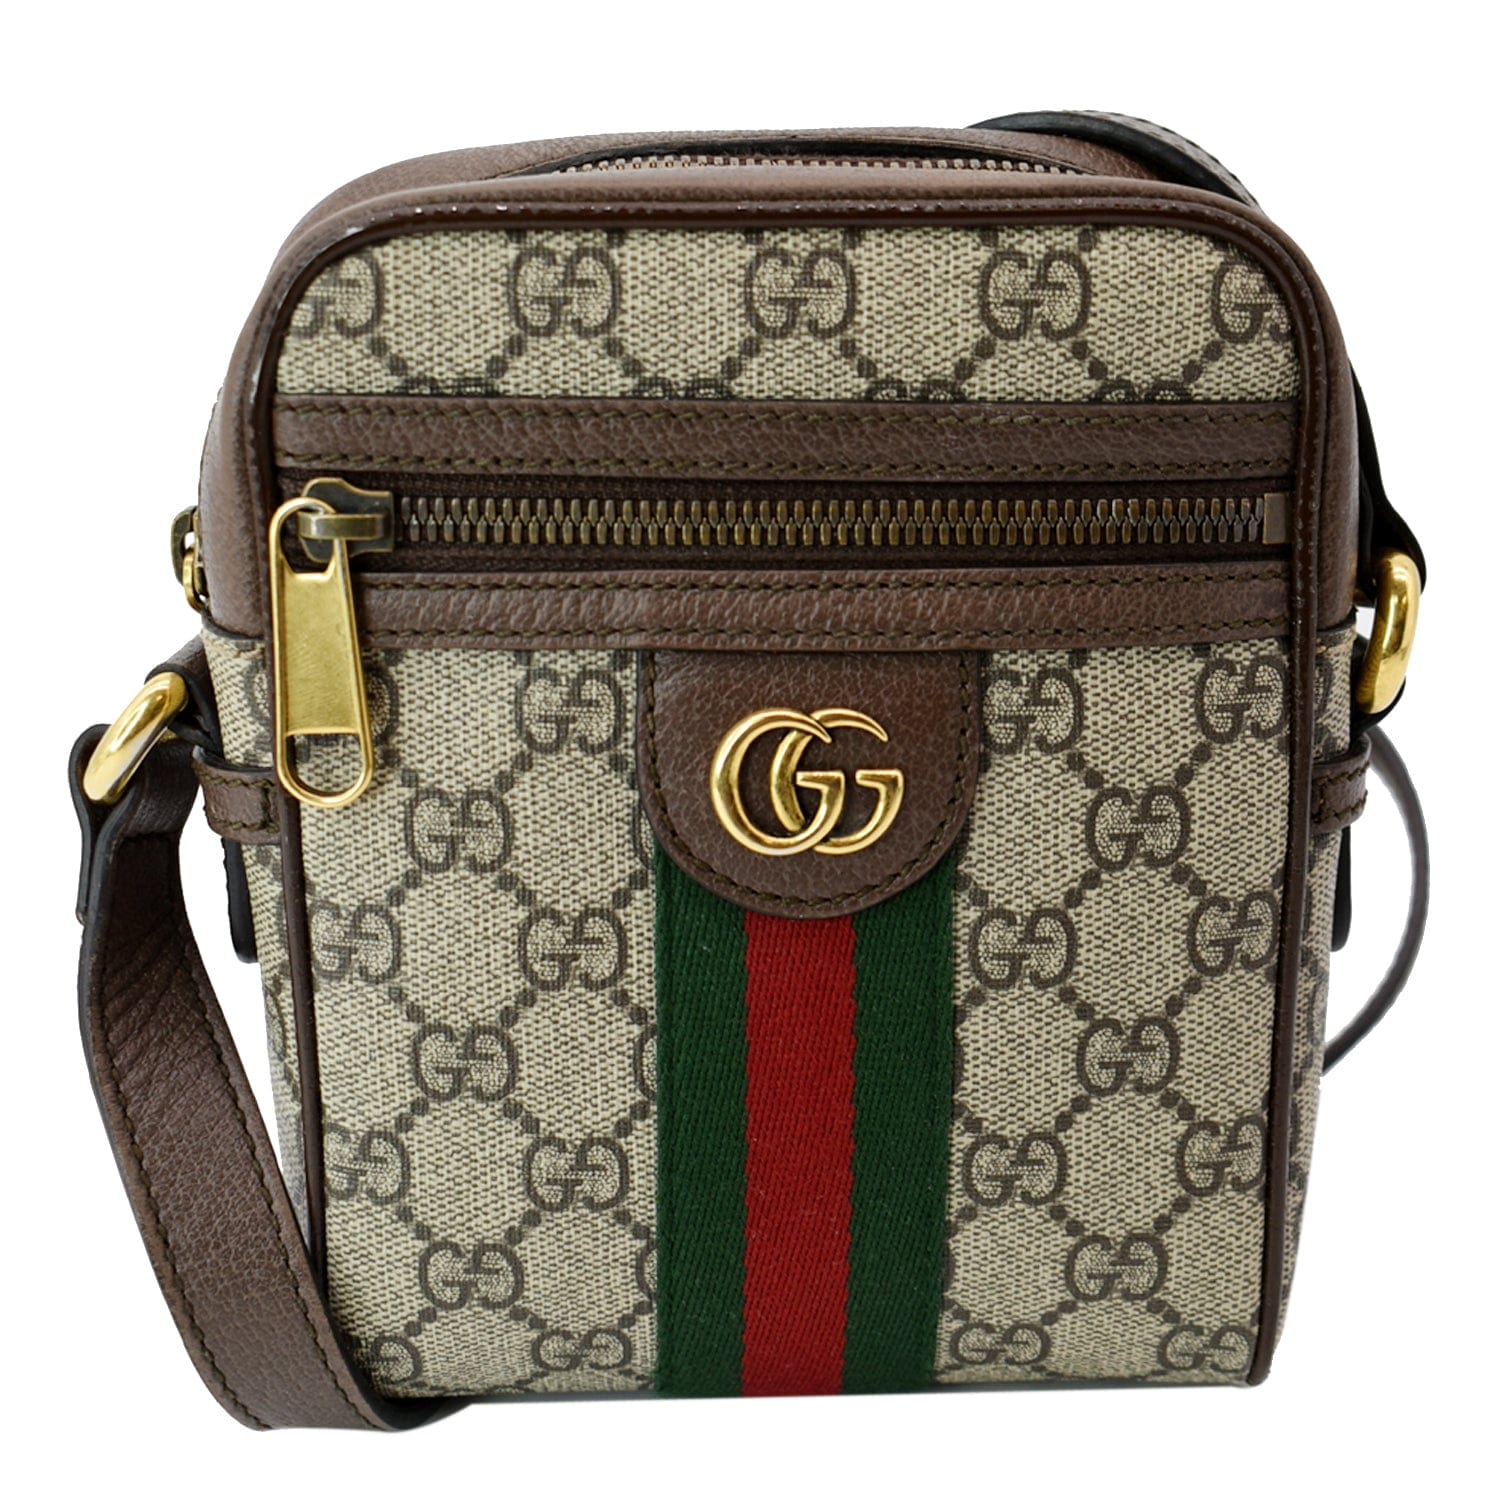 100% Authentic Gucci GG Ophidia Large Shoulder Bag and Clutch Bag